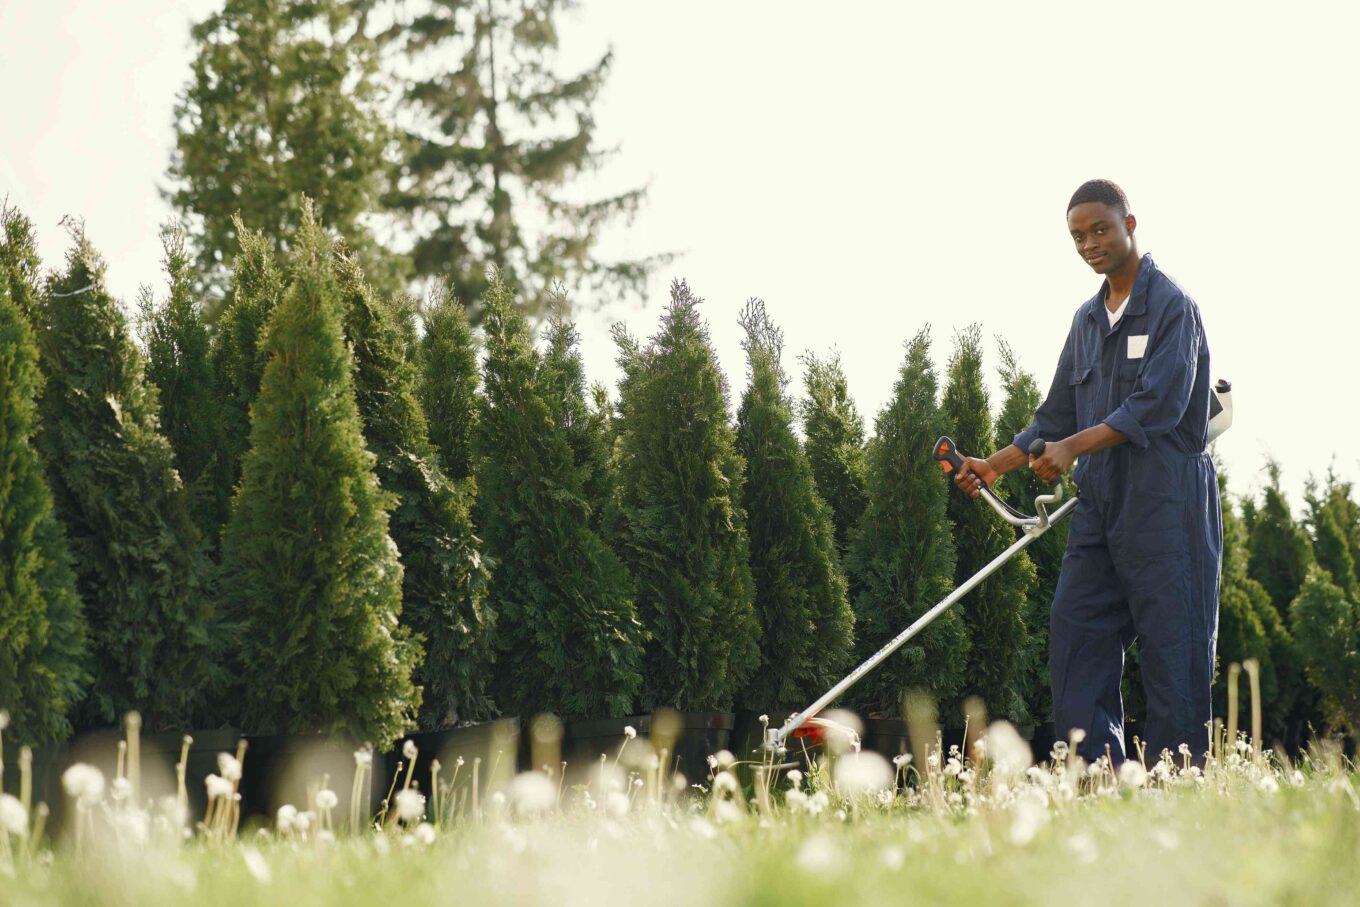 How to Start Lawn Care Business and Best Tips for Starting